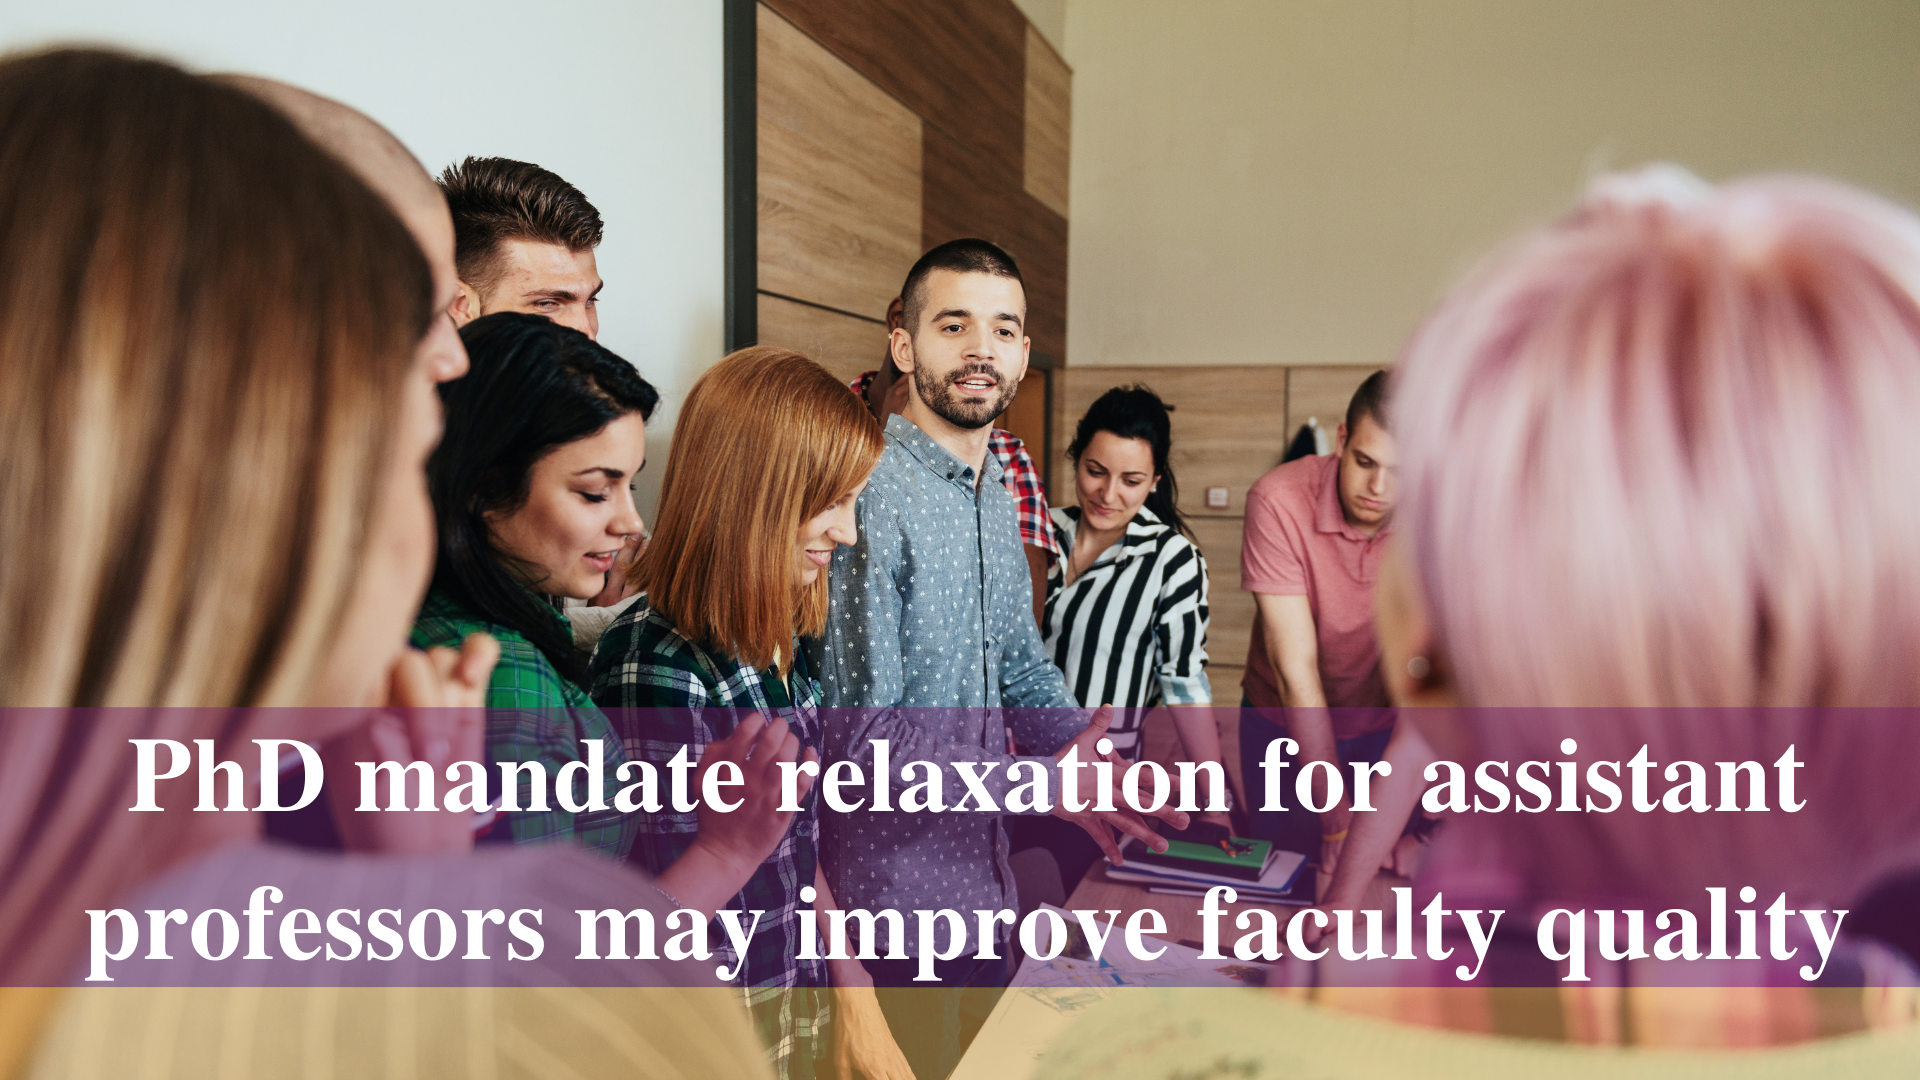 Ph.D. mandate relaxation for assistant professors may improve faculty quality